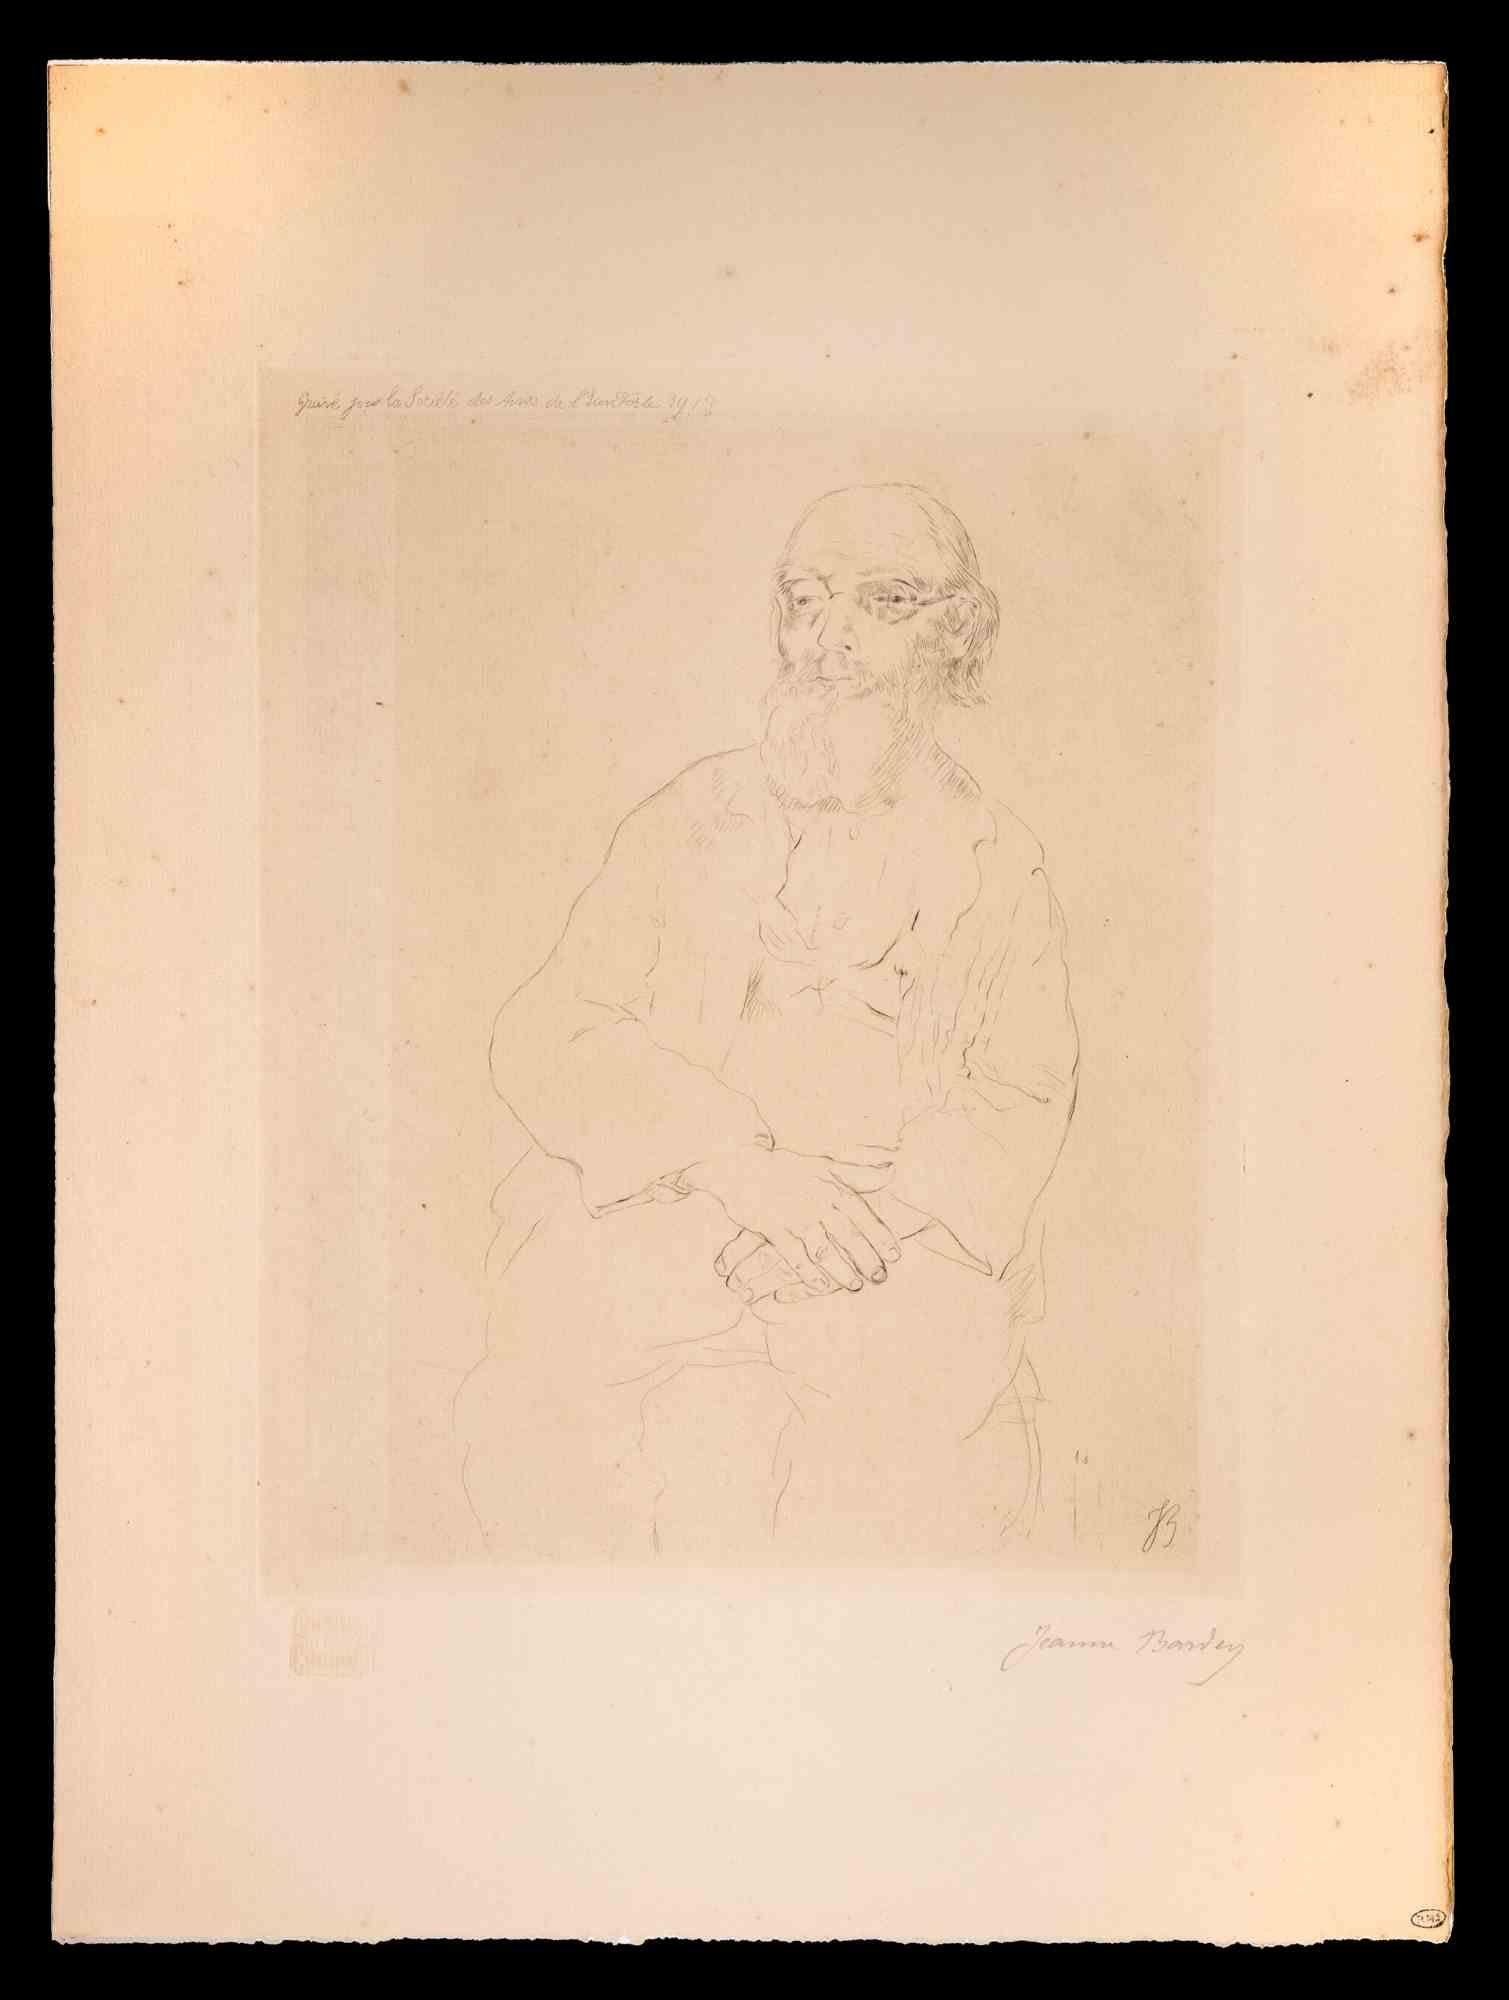 The Old Teacher of Philosophy - Original Drypoint by Jeanne Bardey - 1913